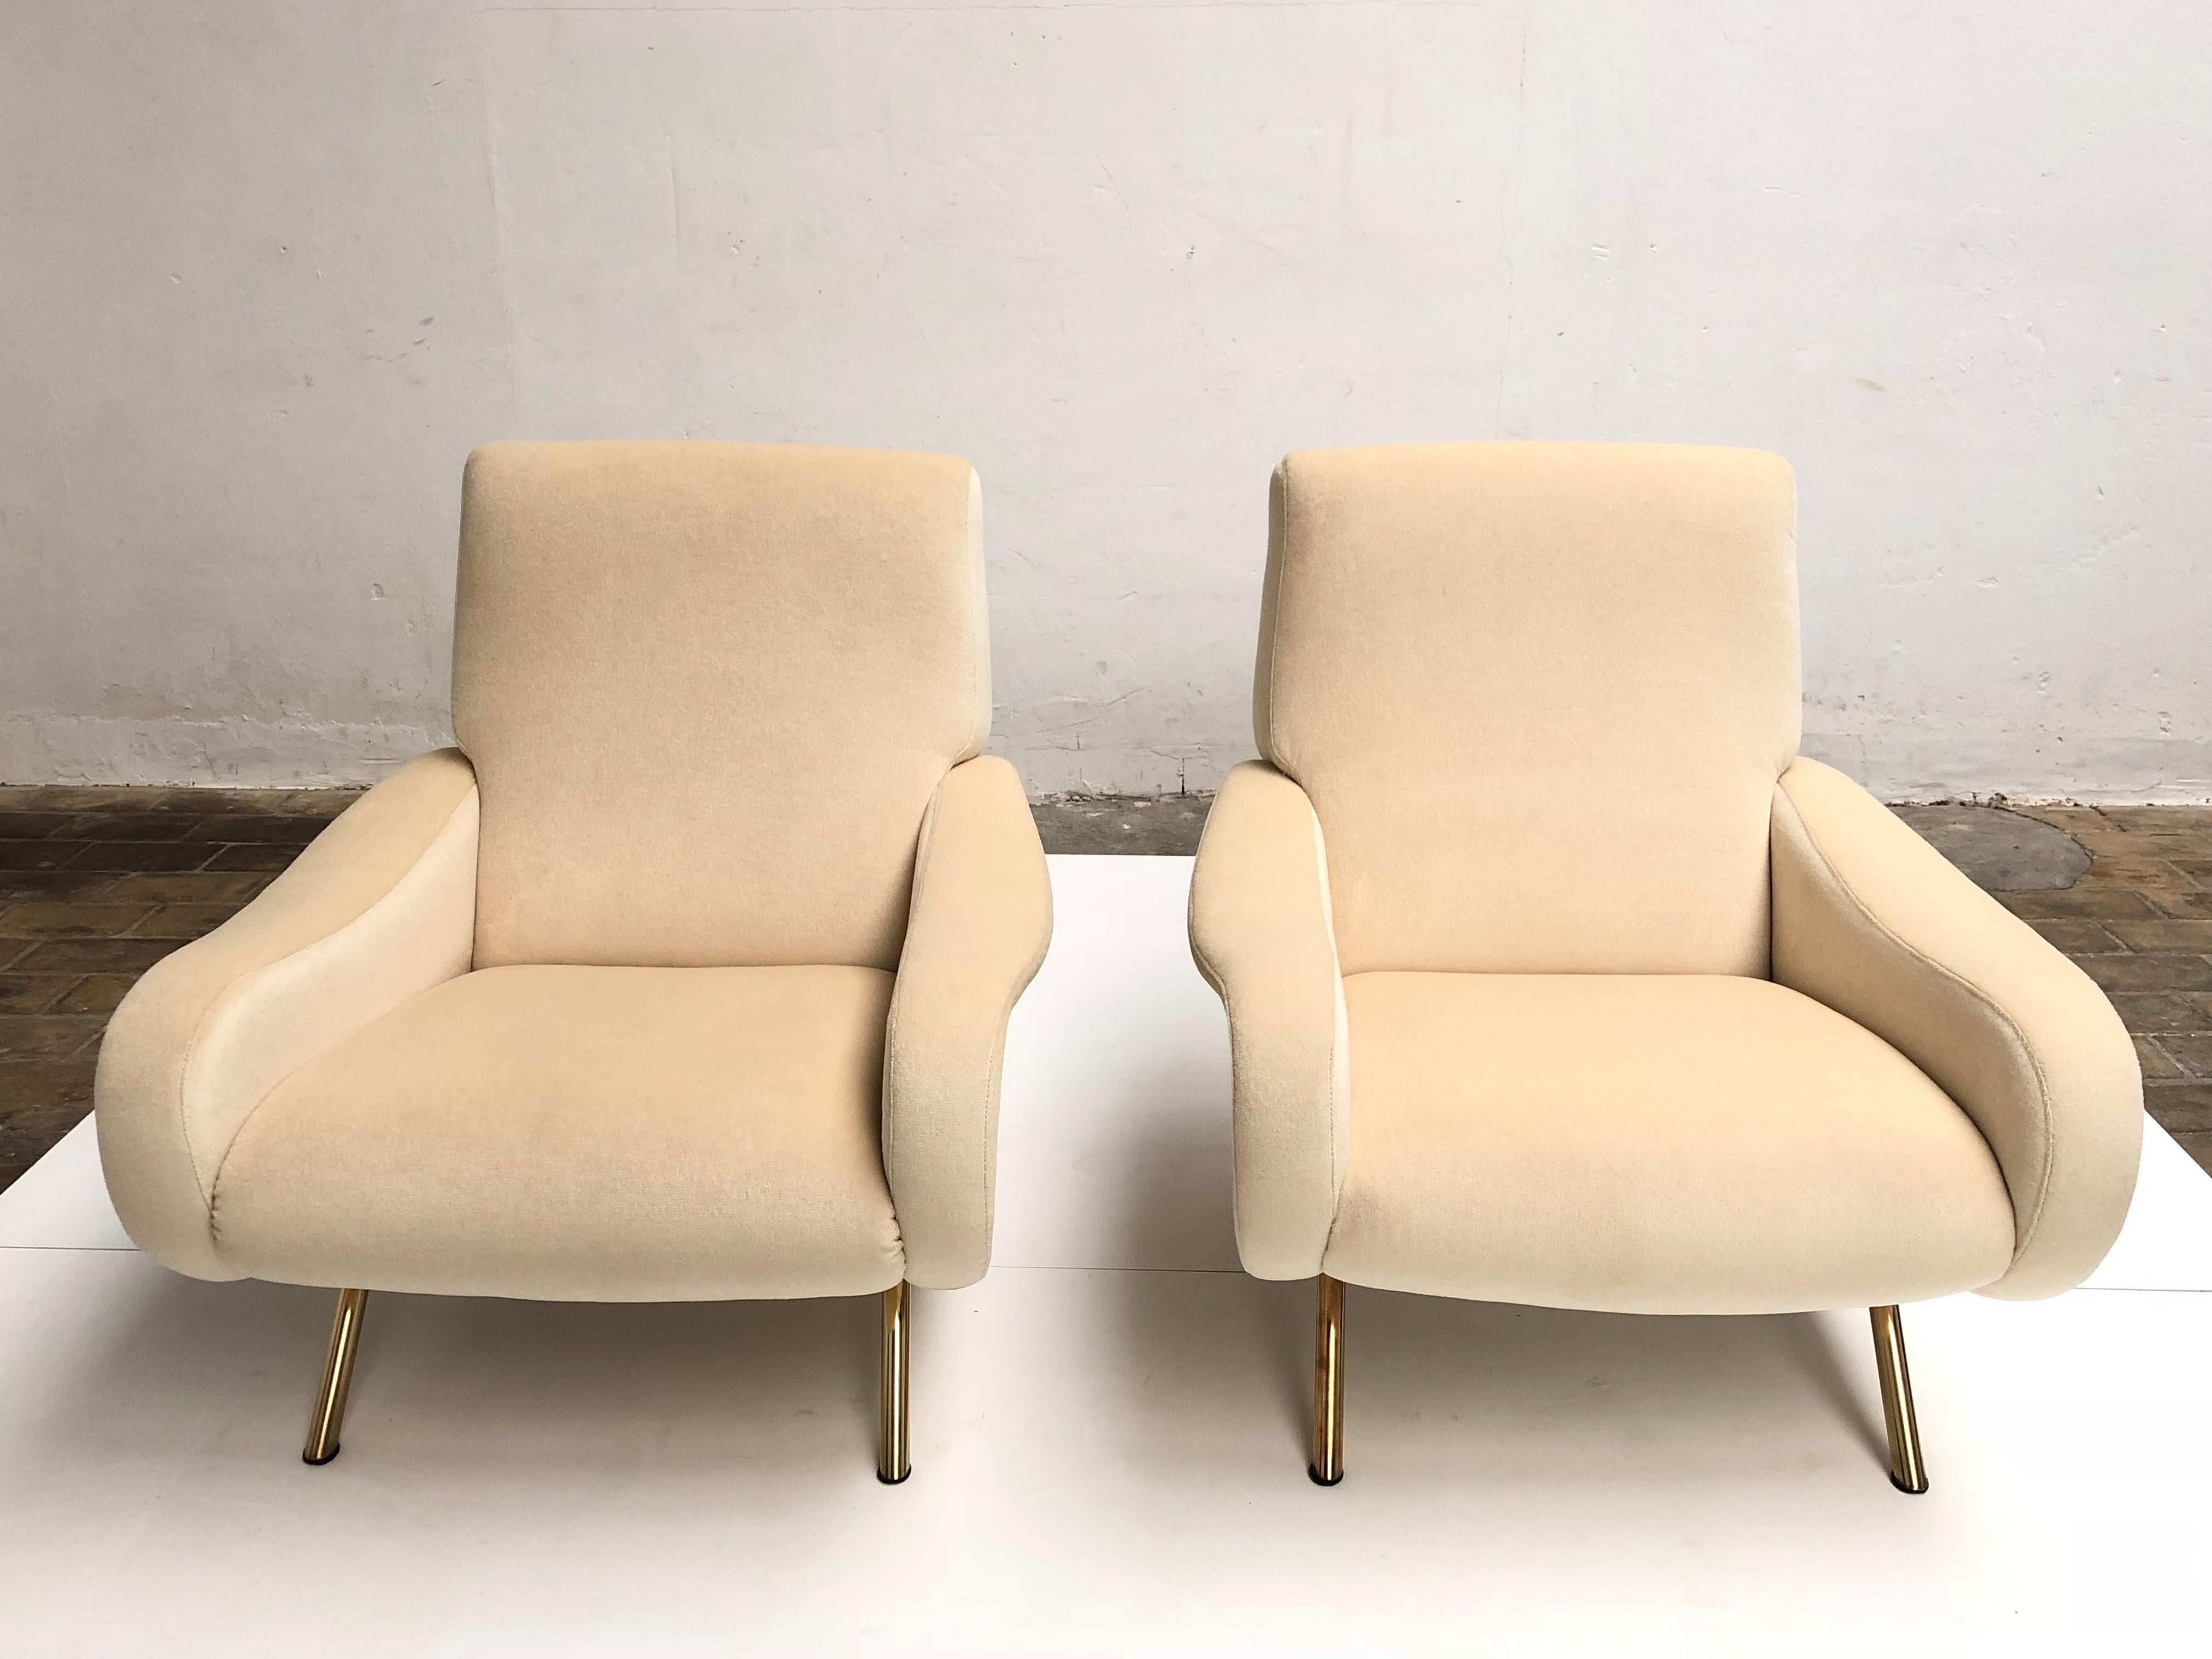 Italian Restored Early Production Wood Frame Zanuso 'Lady' Chairs, 1951, Mohair Fabric 